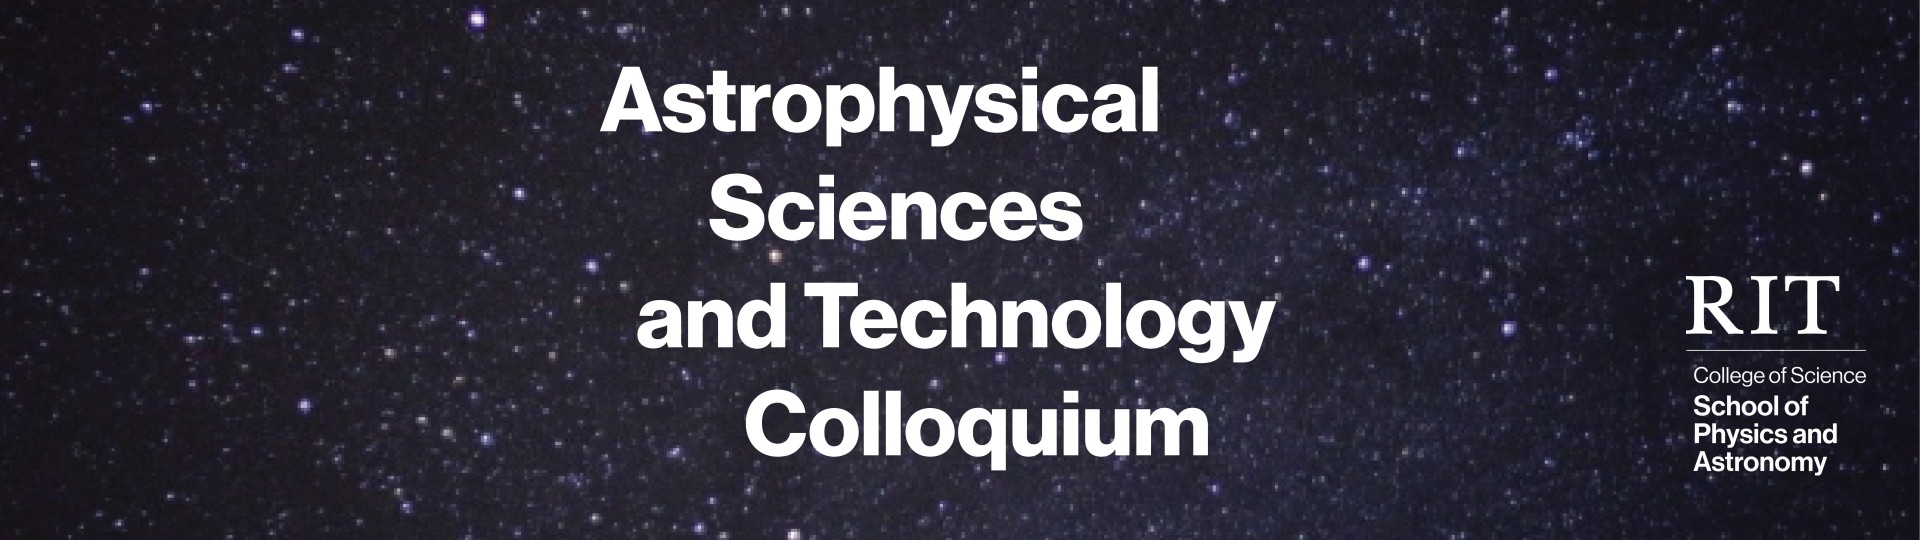 Astrophysical Sciences and Technology Event Banner